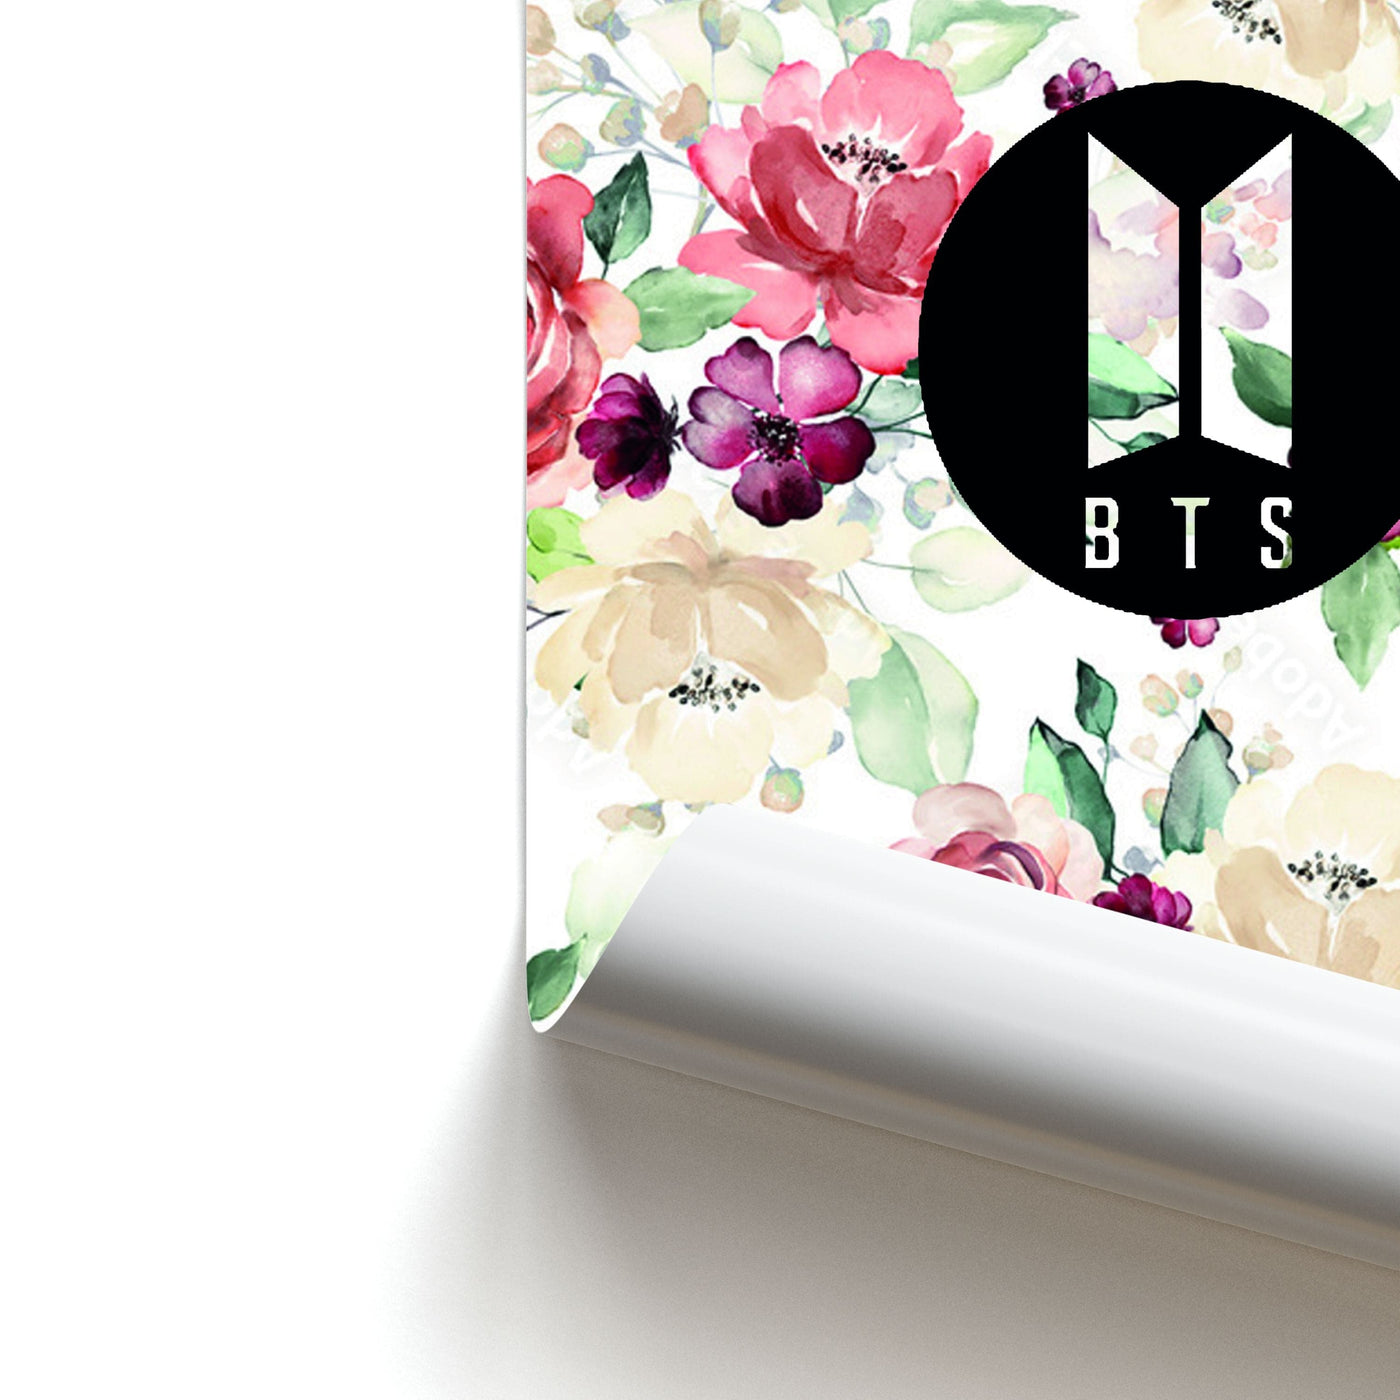 BTS Logo And Flowers - BTS Poster